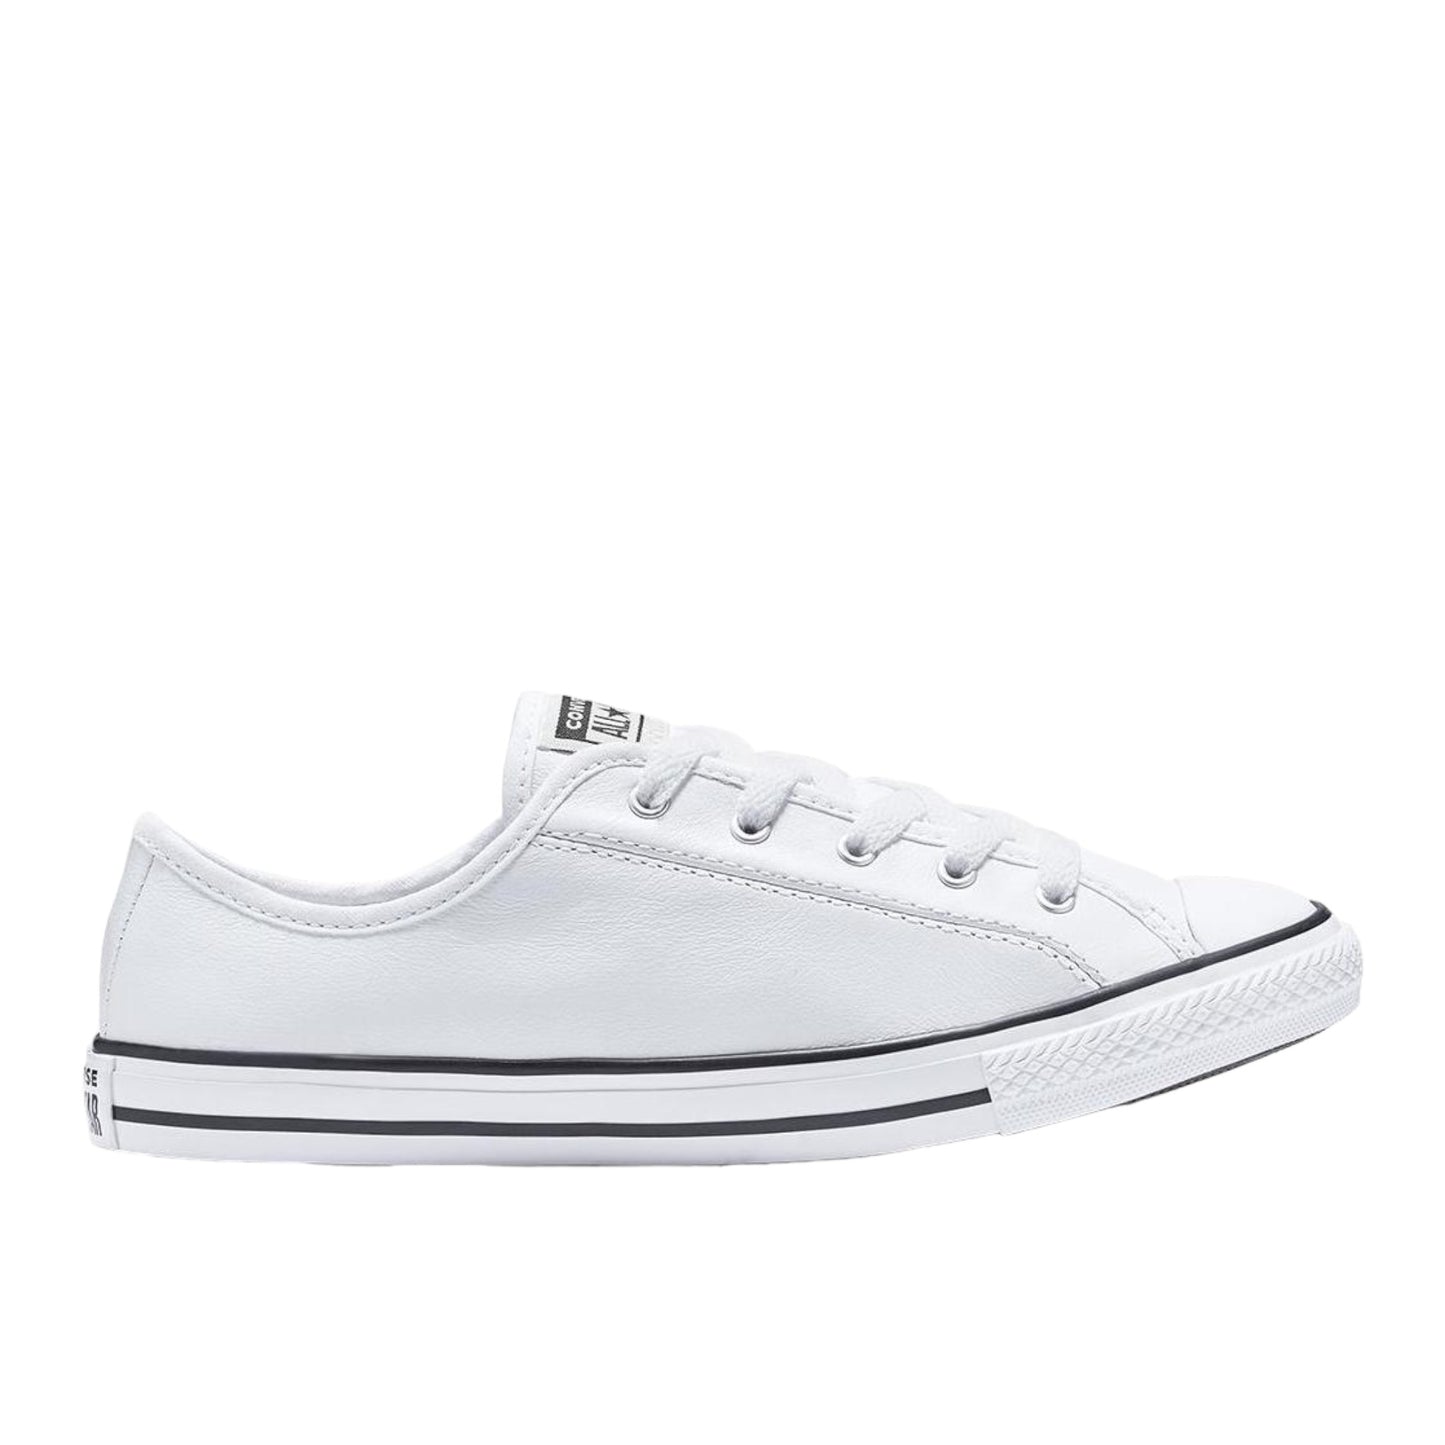 + Converse CT All Star Dainty Leather Low Top White - (564984C 564984) - POP - R1L8